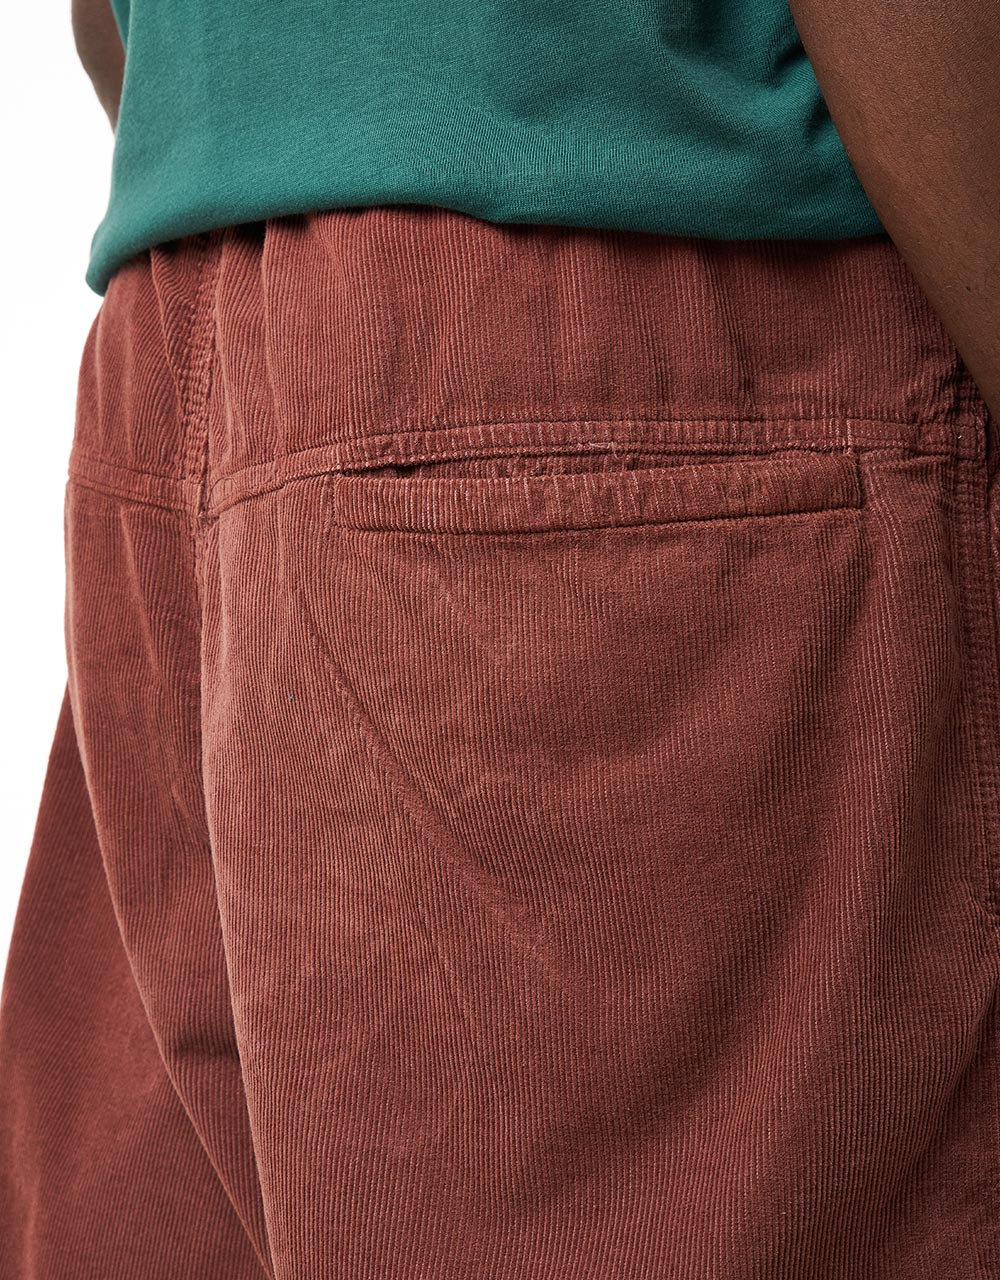 Route One Classic Cord Beach Pants - Cappuccino